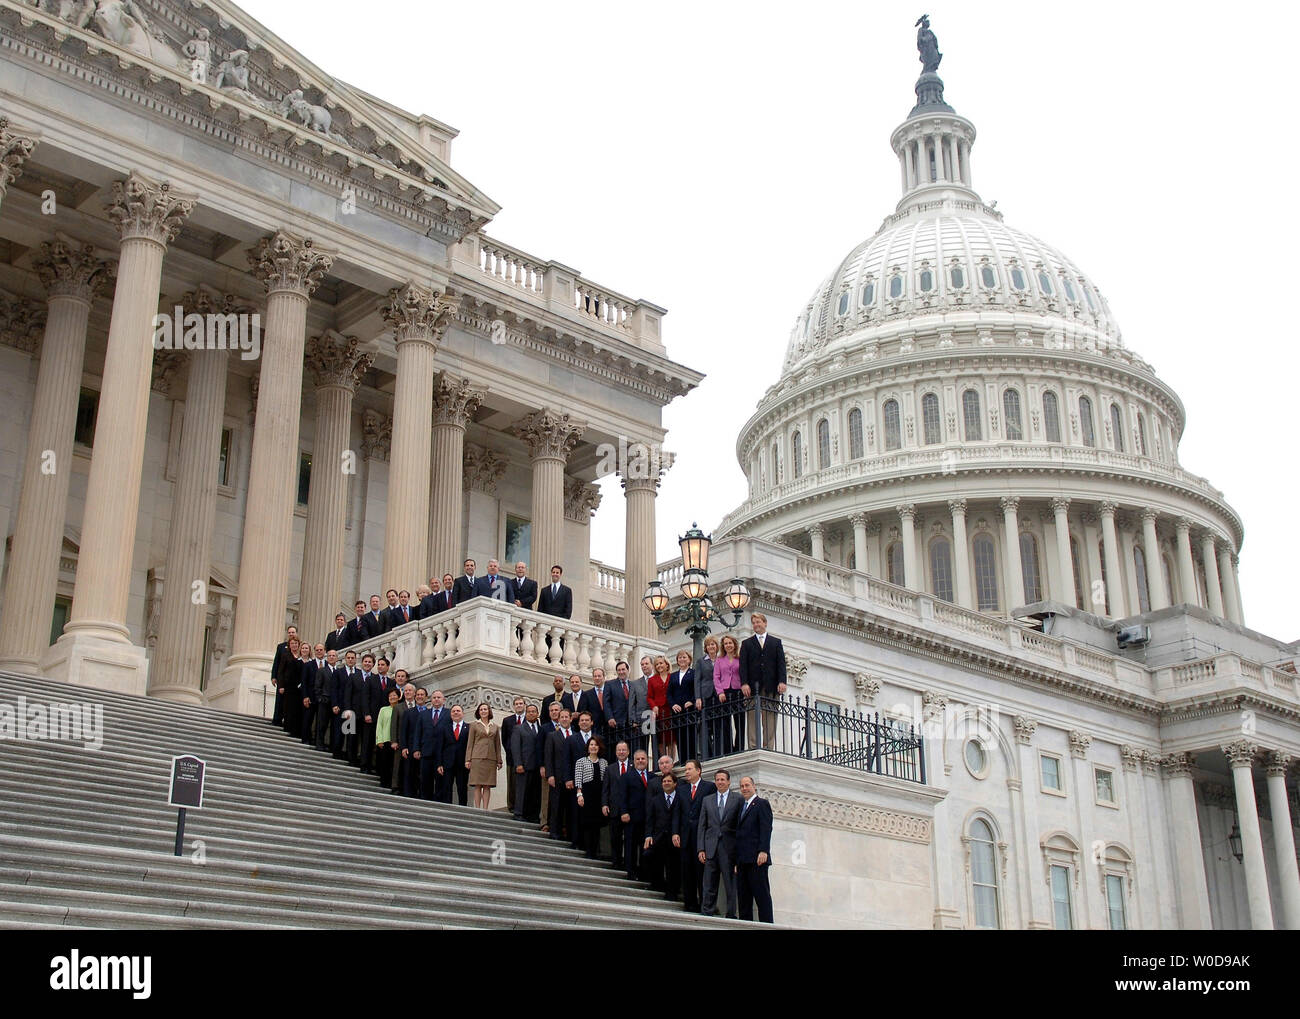 The freshman class of the 110th Congress pose for a group photo on the East Front Steps of the House side of the U.S. Capitol Building, in Washington on November 14, 2006. The Democrats take control of both the House and Senate in January.  (UPI Photo/Kevin Dietsch) Stock Photo